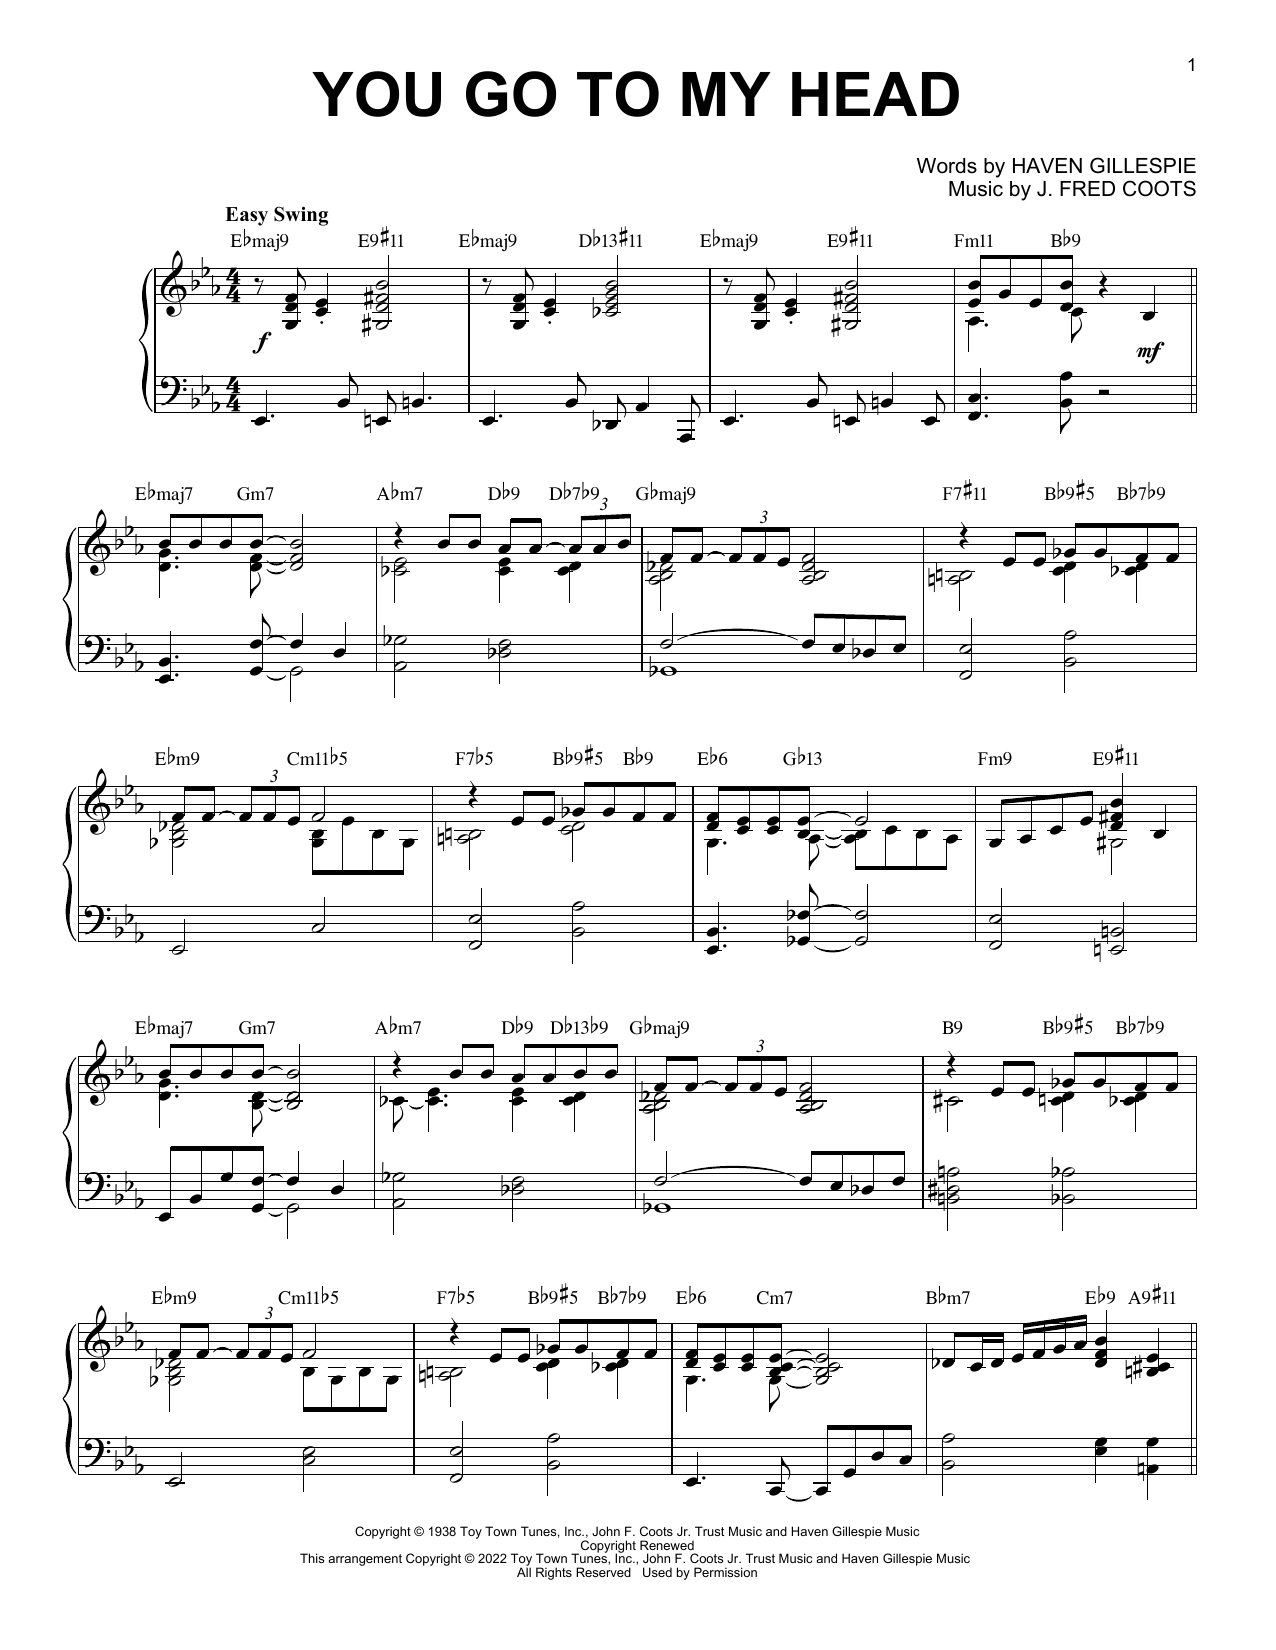 Download Haven Gillespie and J. Fred Coots You Go To My Head [Jazz version] (arr. Sheet Music